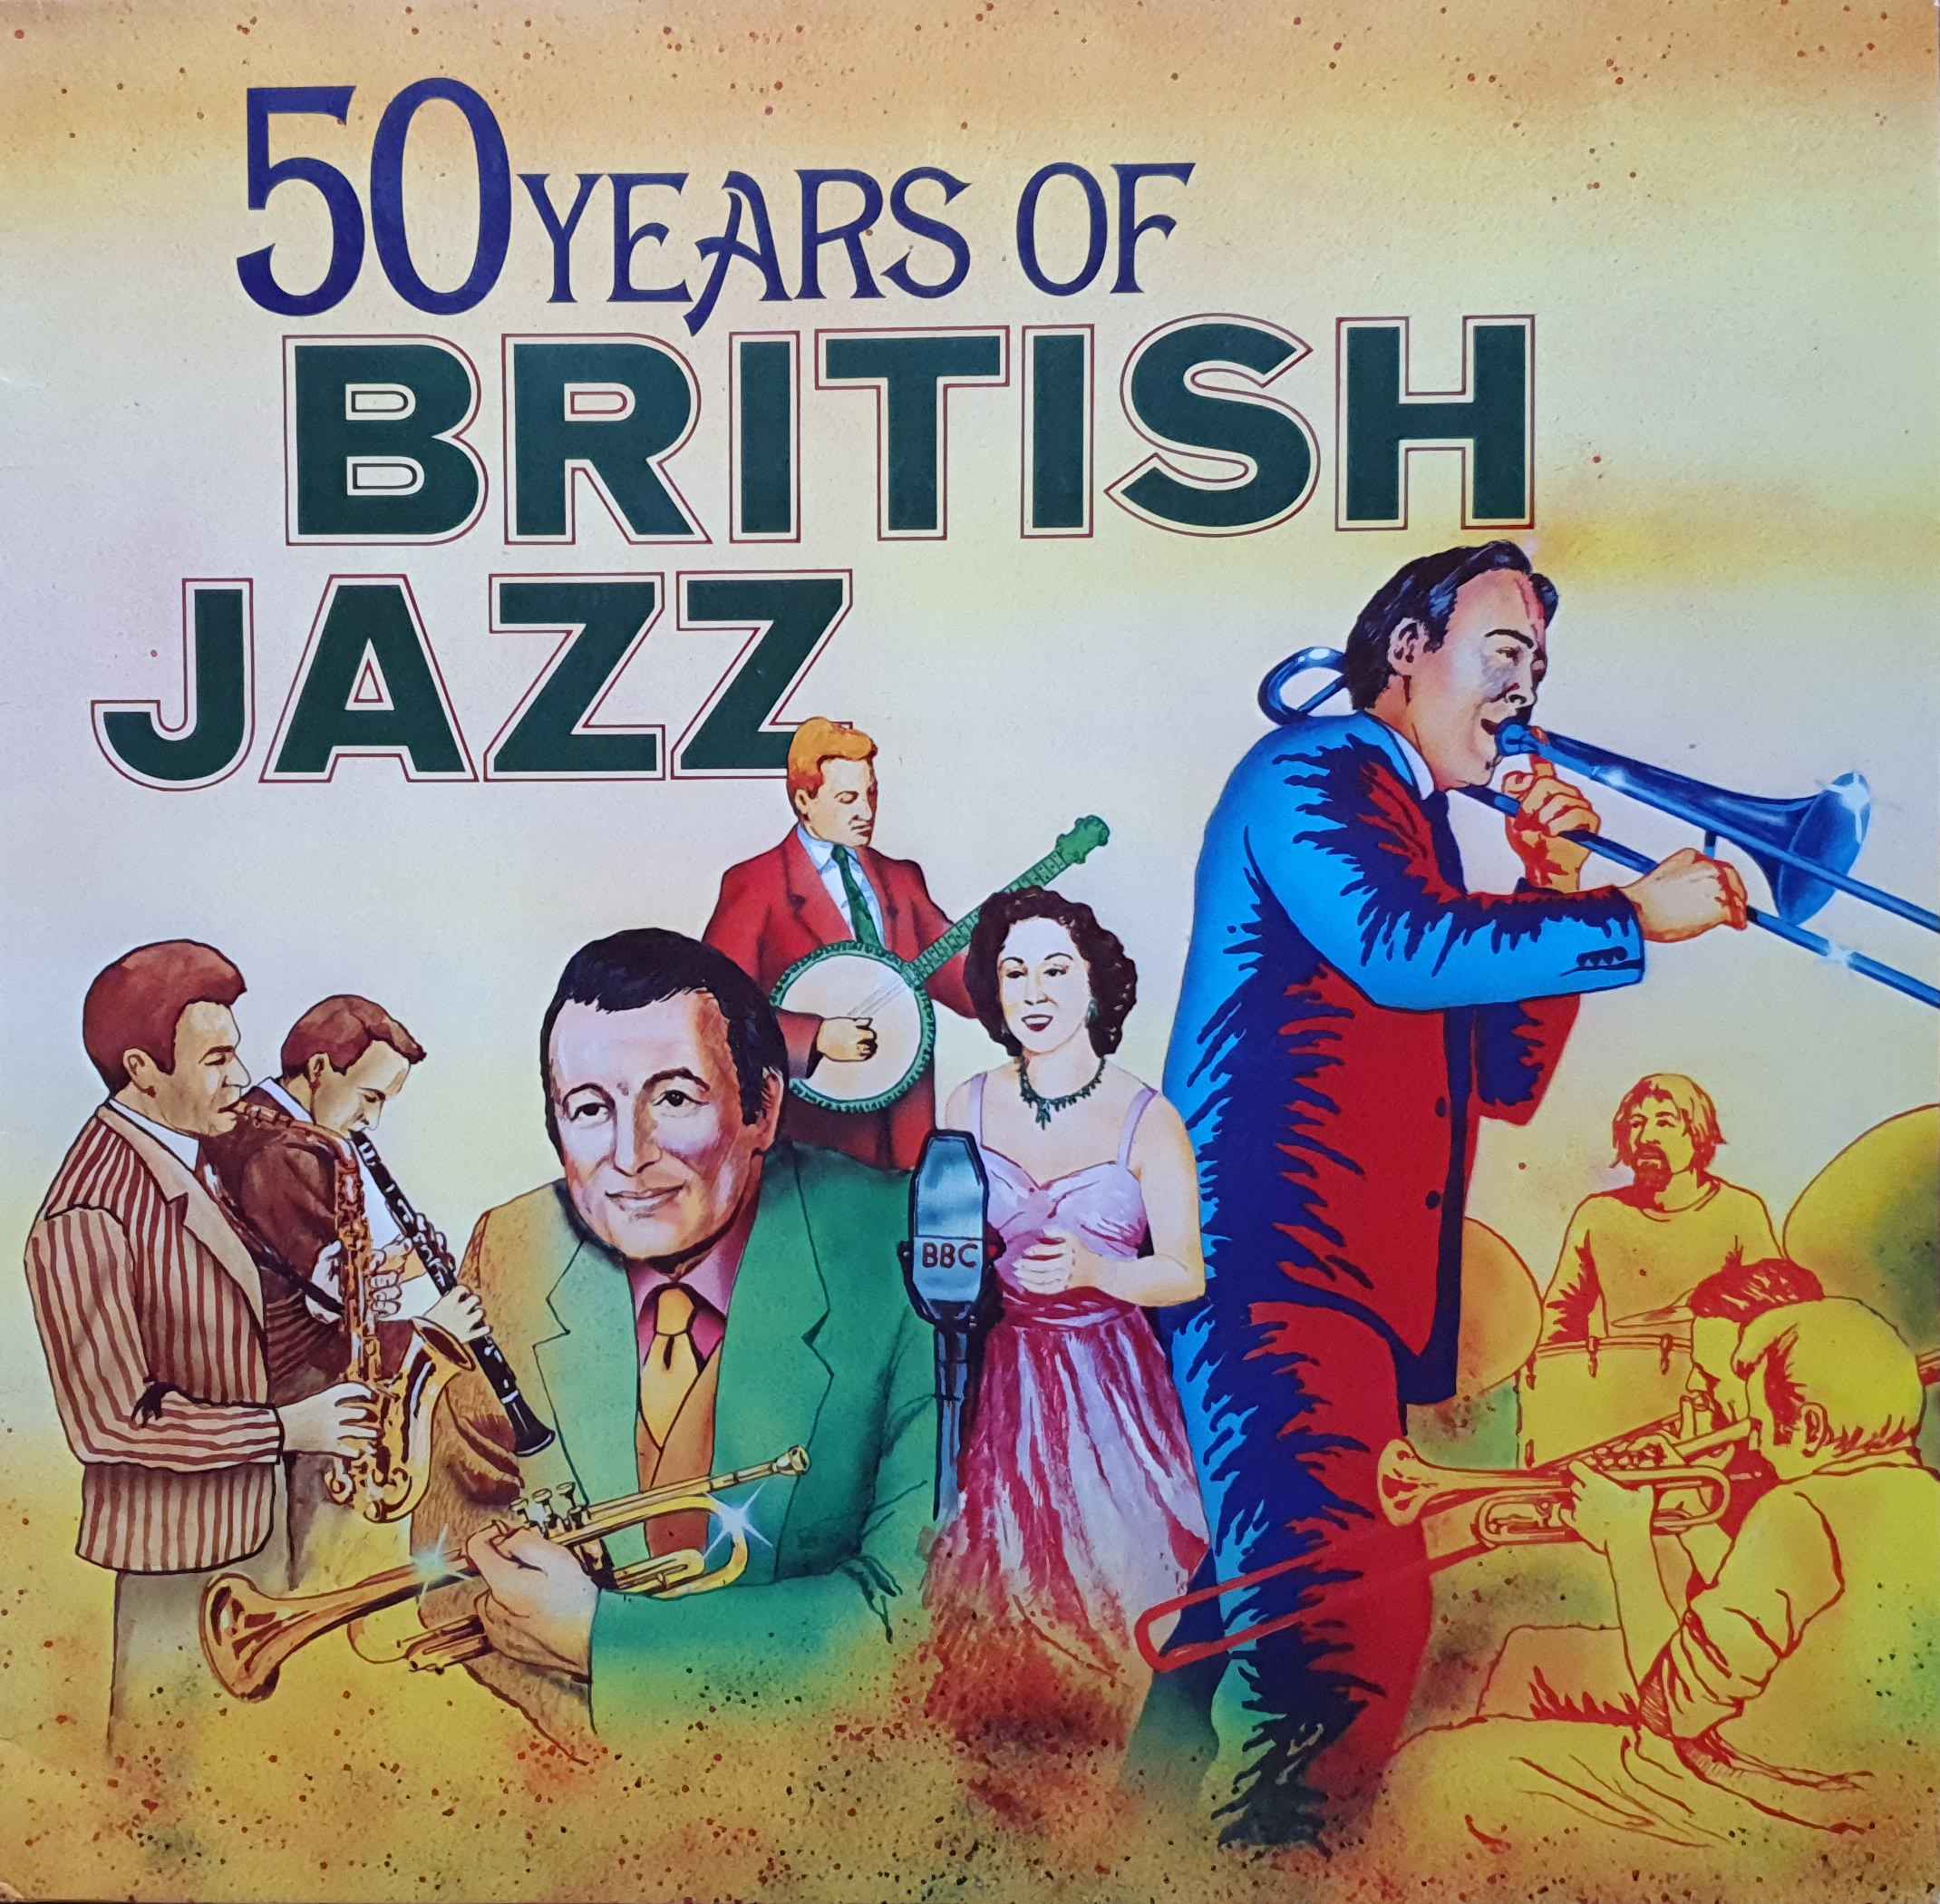 Picture of INT 158.001 50 years of British jazz by artist Various from the BBC albums - Records and Tapes library